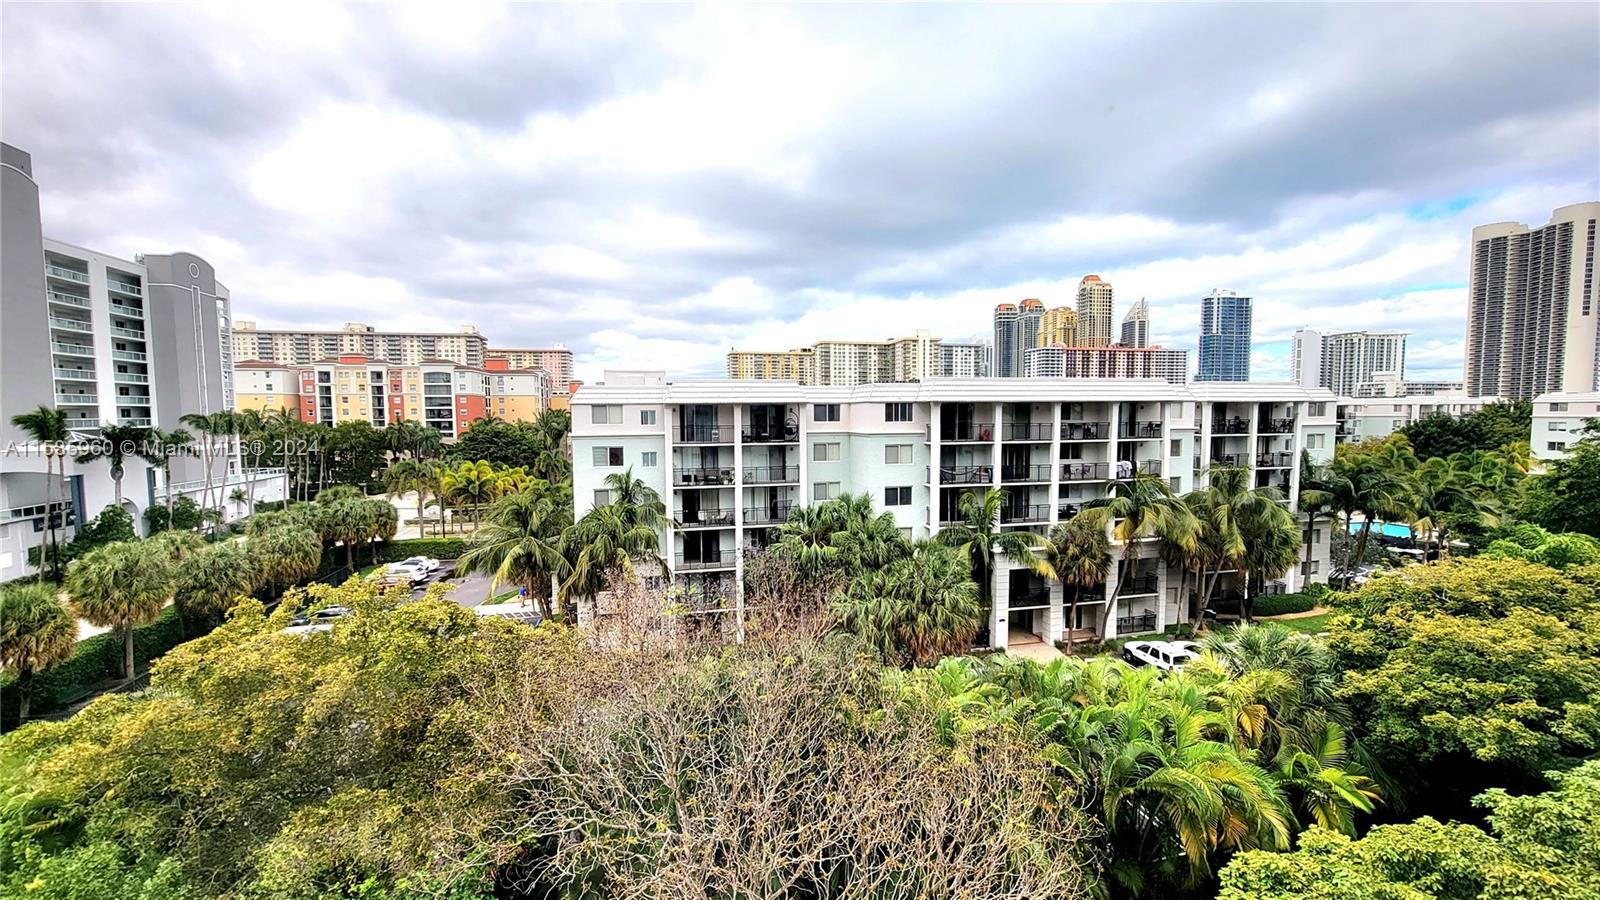 WATERVIEW UNIT IN A DESIRED GATED COMMUNITY OF SUNNY ISLES BEACH. PERFECT LOCATION WITH A CLOSE COMM